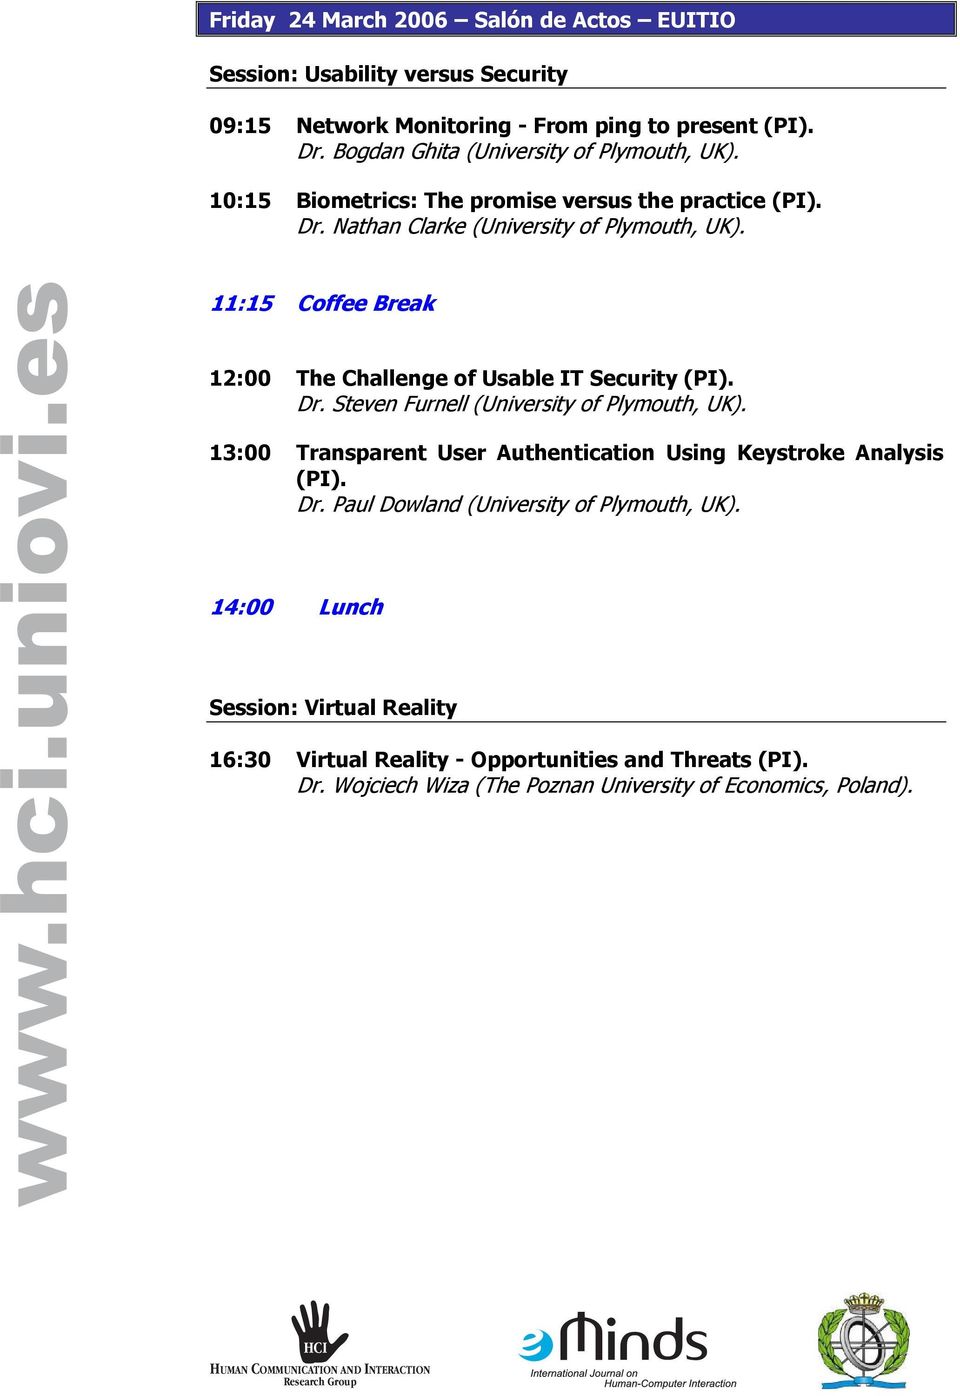 11:15 Coffee Break 12:00 The Challenge of Usable IT Security (PI). Dr. Steven Furnell (University of Plymouth, UK).